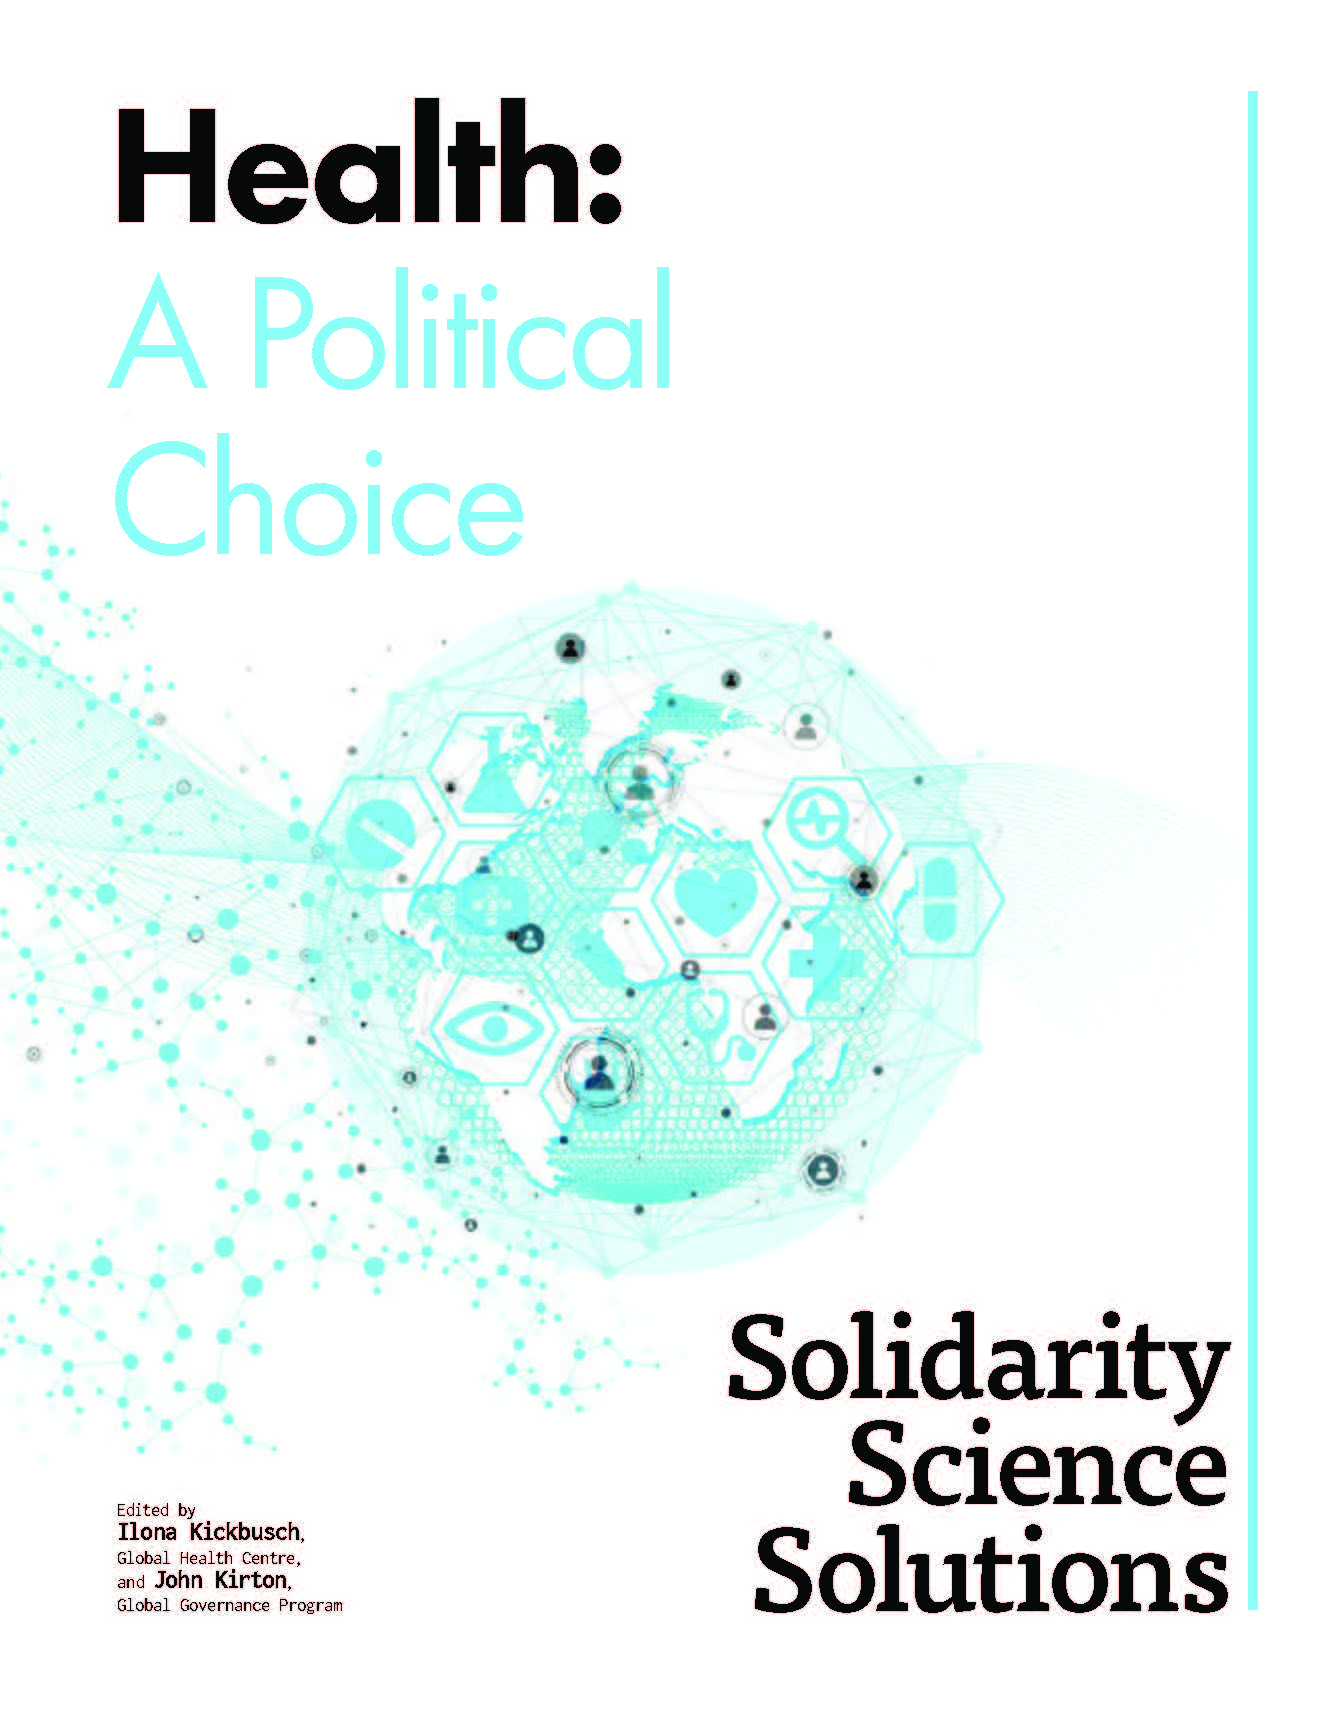 Health: A Political Choice – Solidarity, Science, Solutions